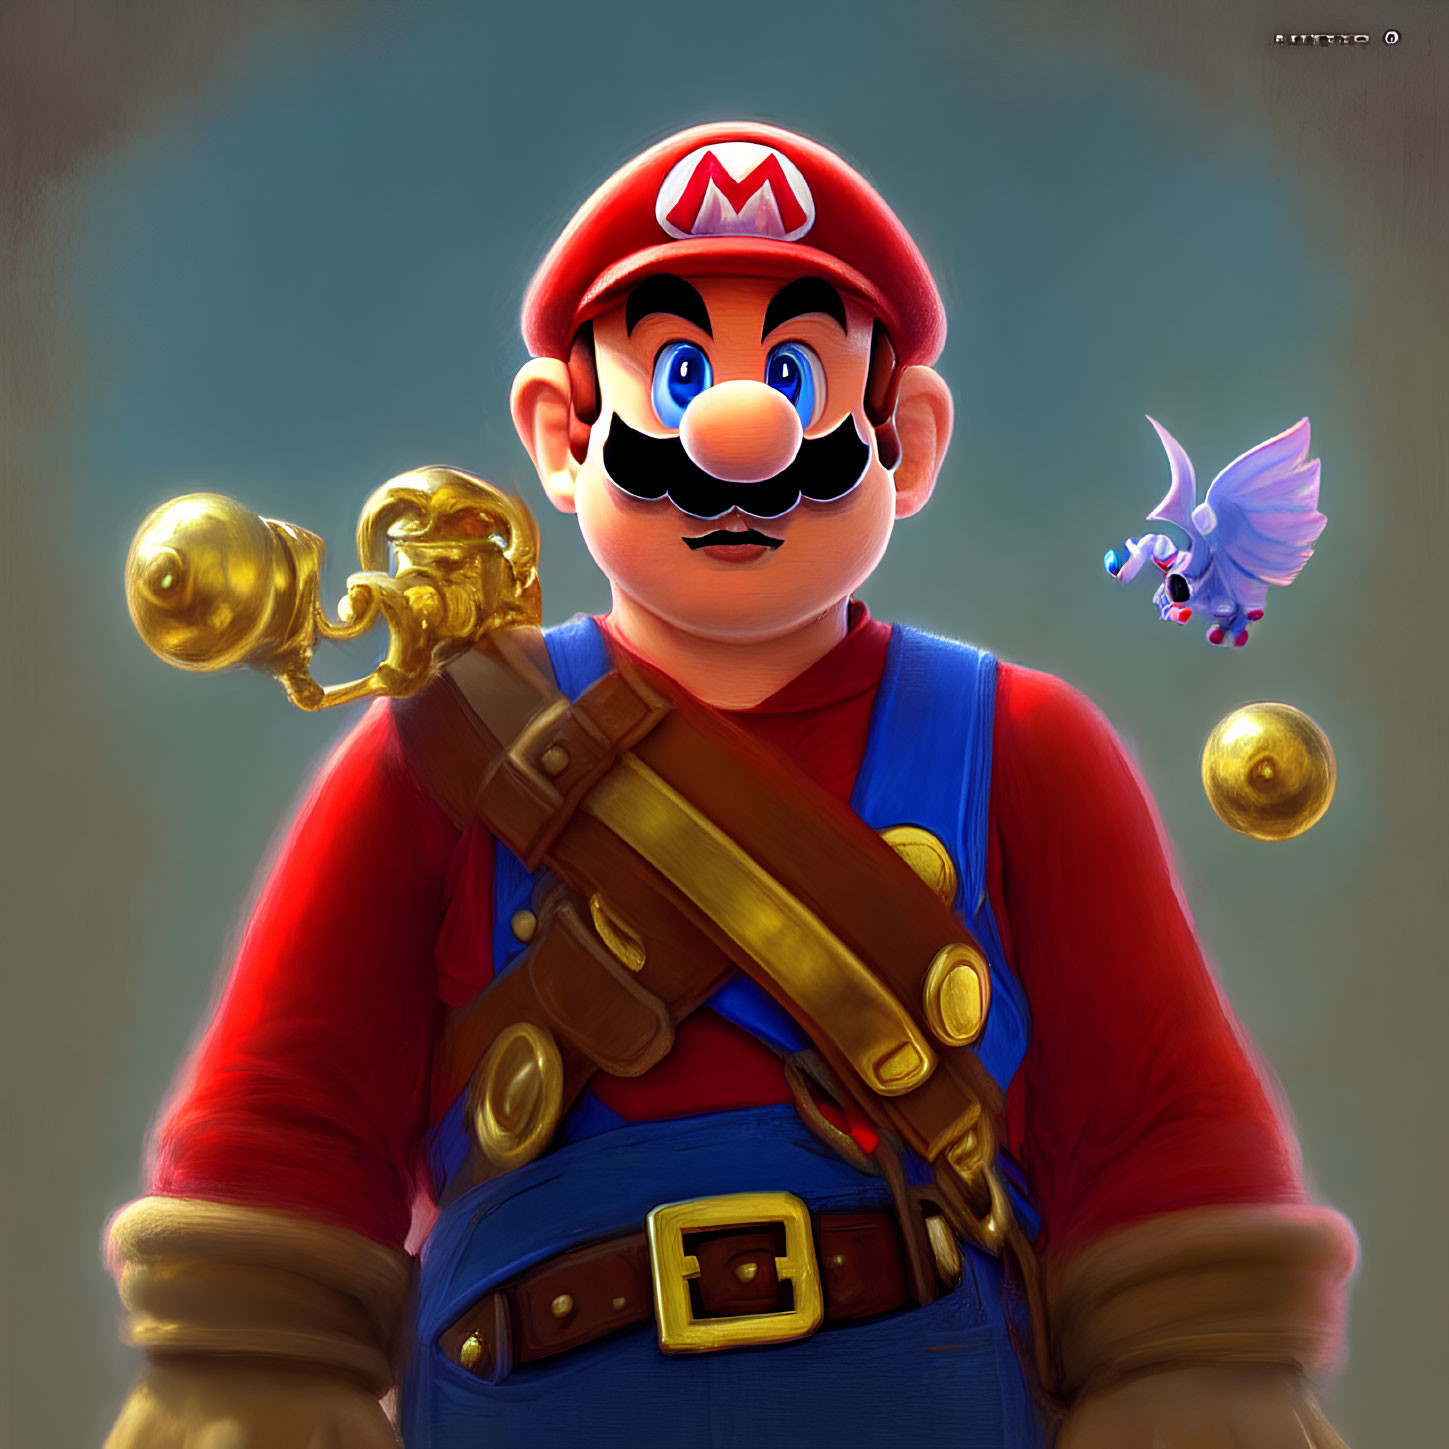 Steampunk-themed Mario illustration with golden shoulder cannon and mechanical bird